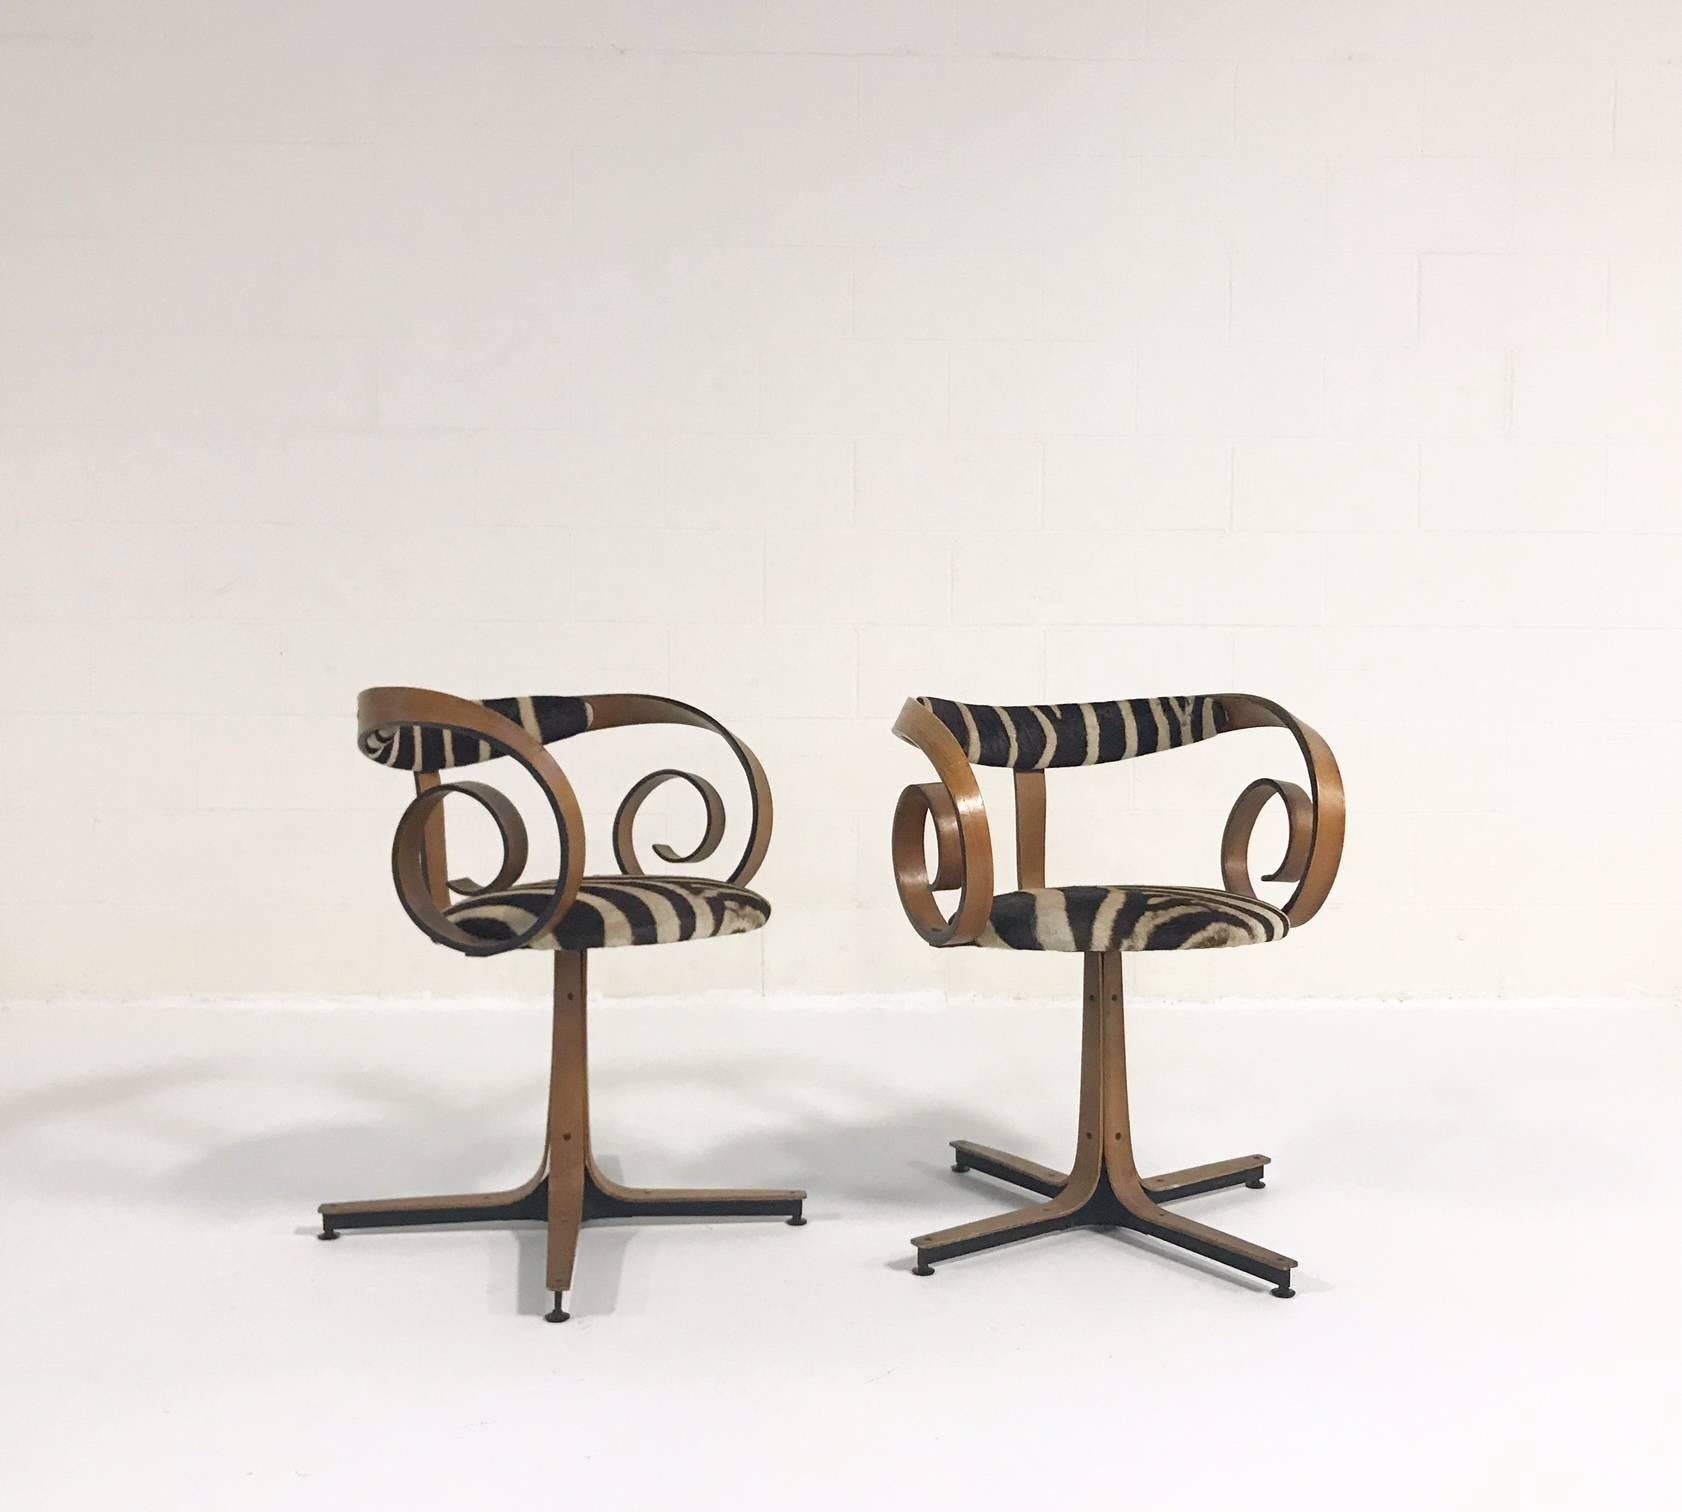 North American George Mulhauser for Plycraft Sultana Chairs Restored in Zebra Hide, Pair